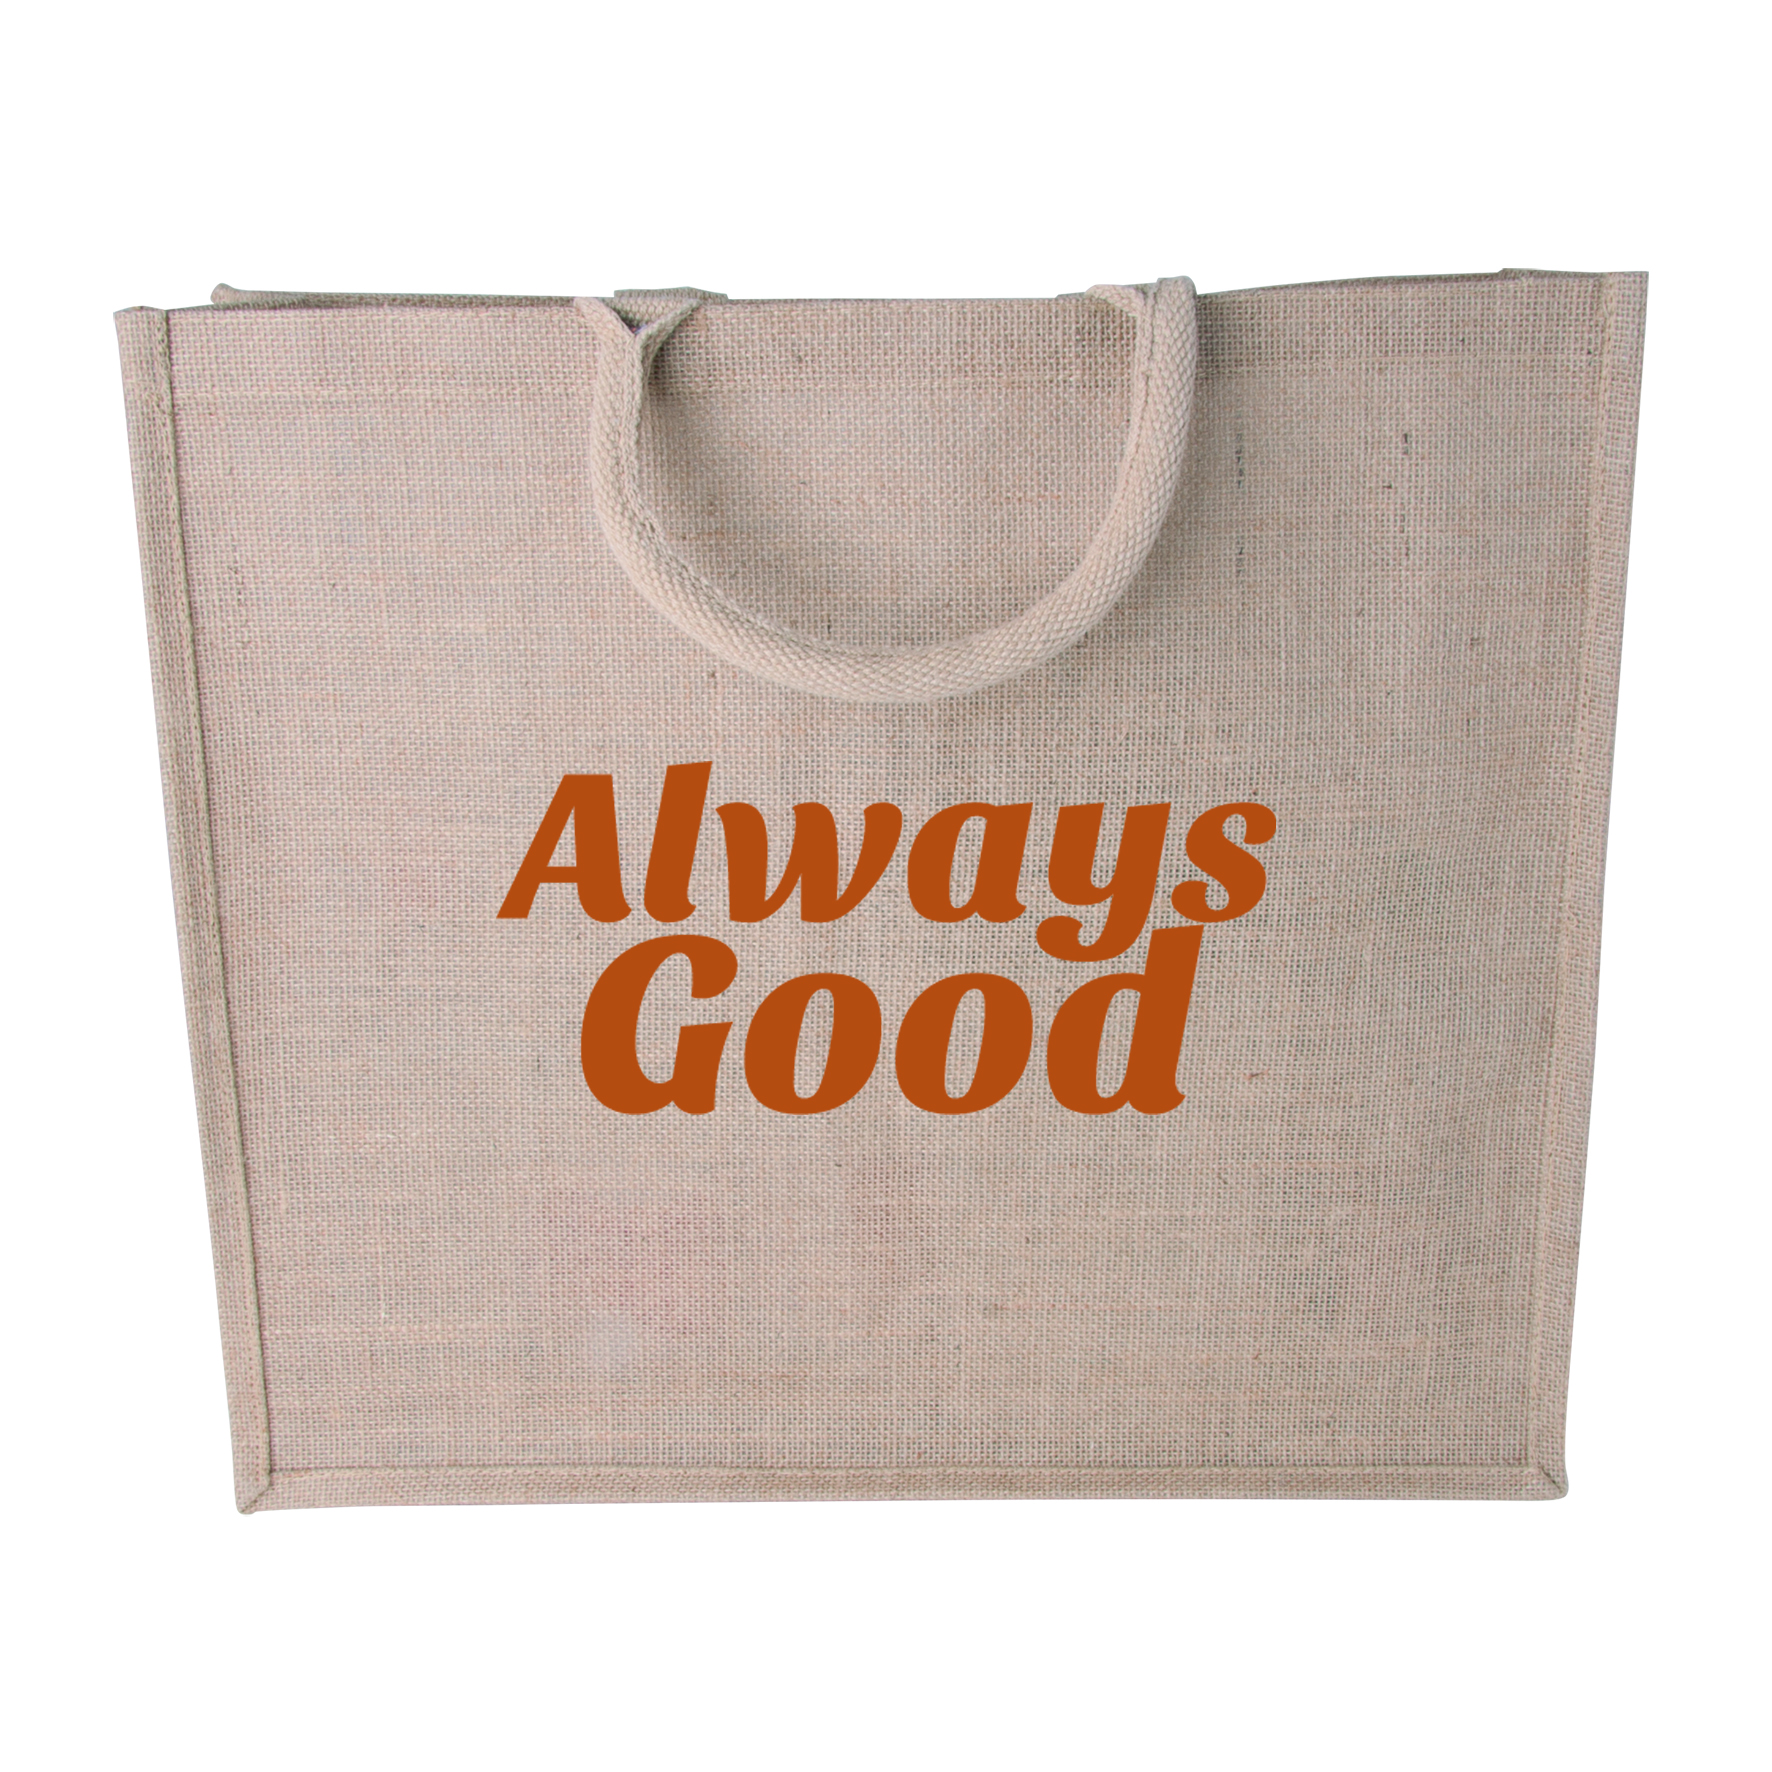 x201213 11 - Canvas shopper with woven handles